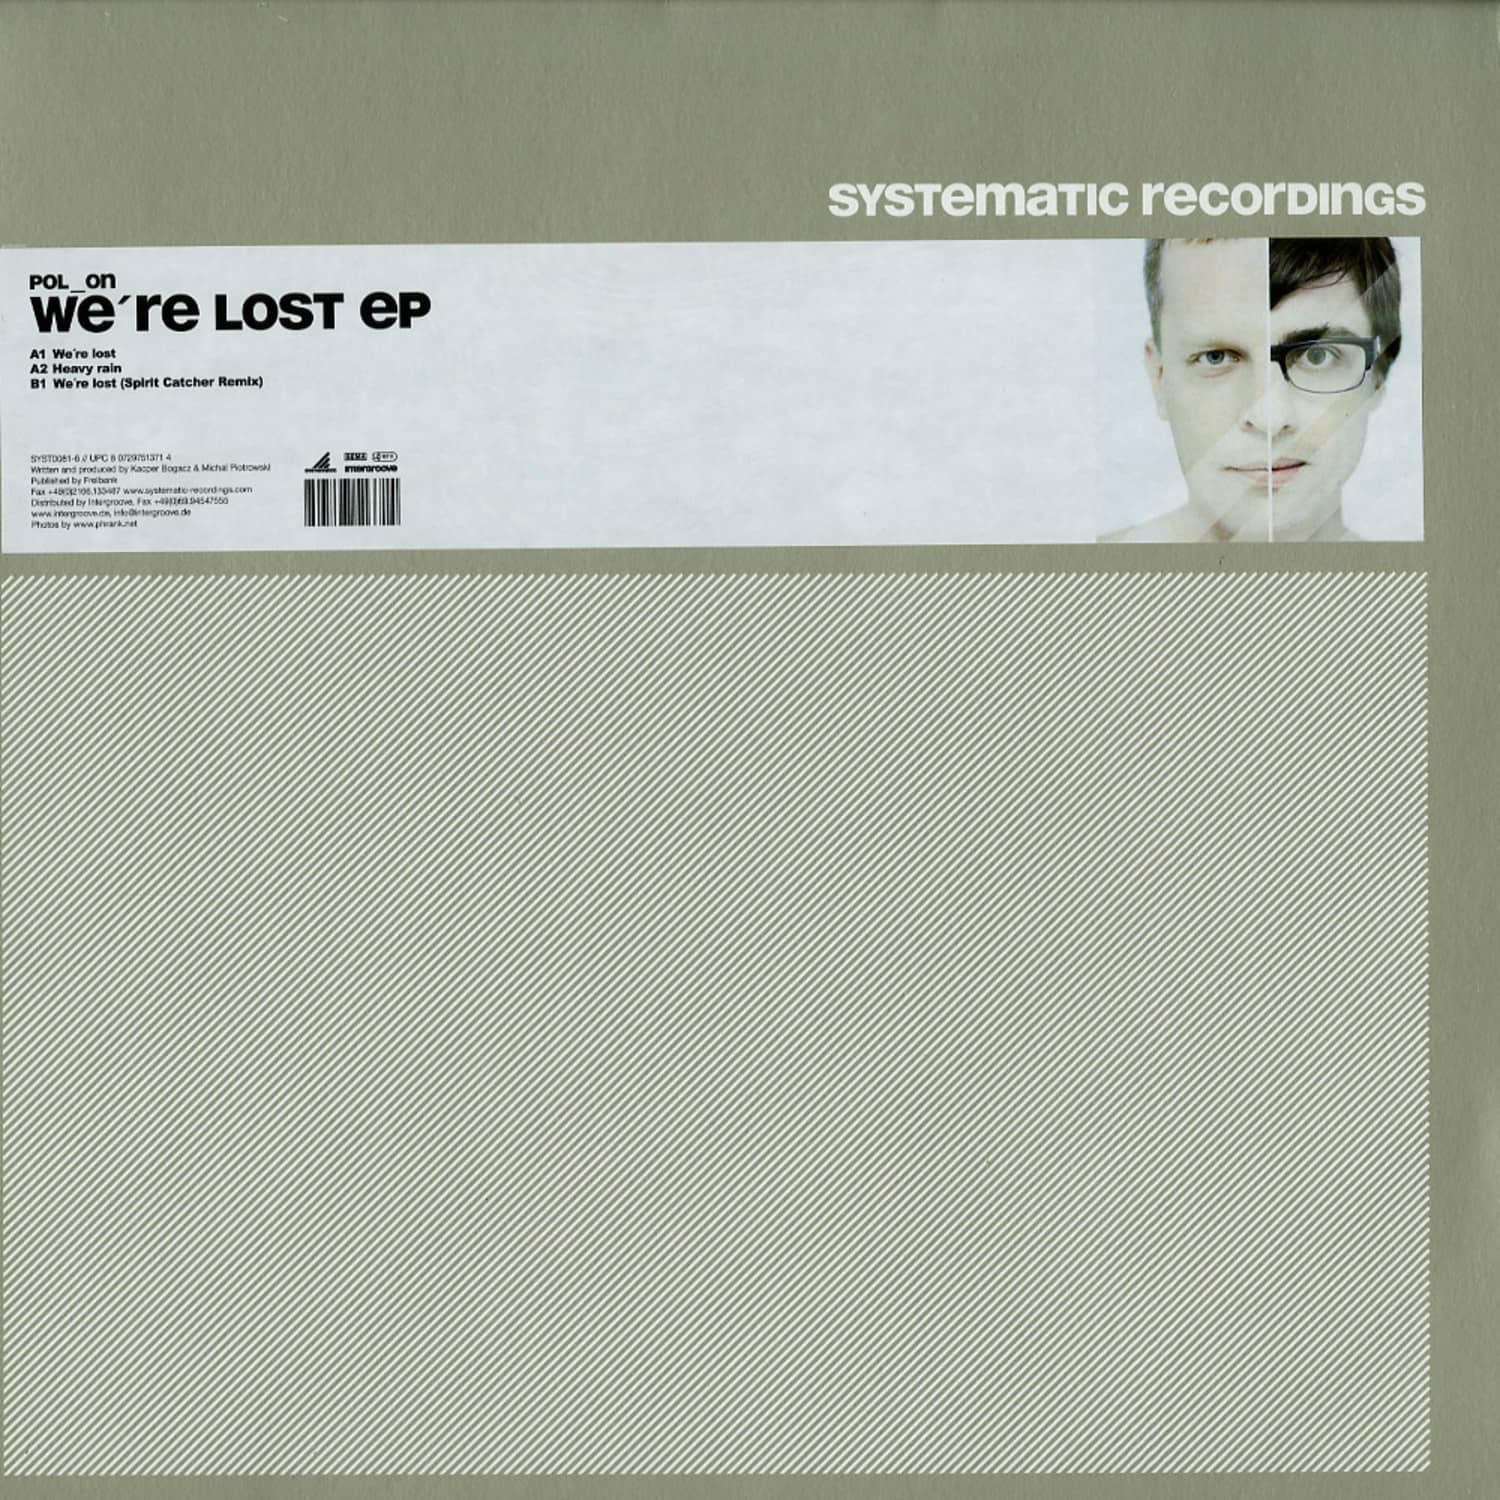 Pol_on - WE ARE LOST EP